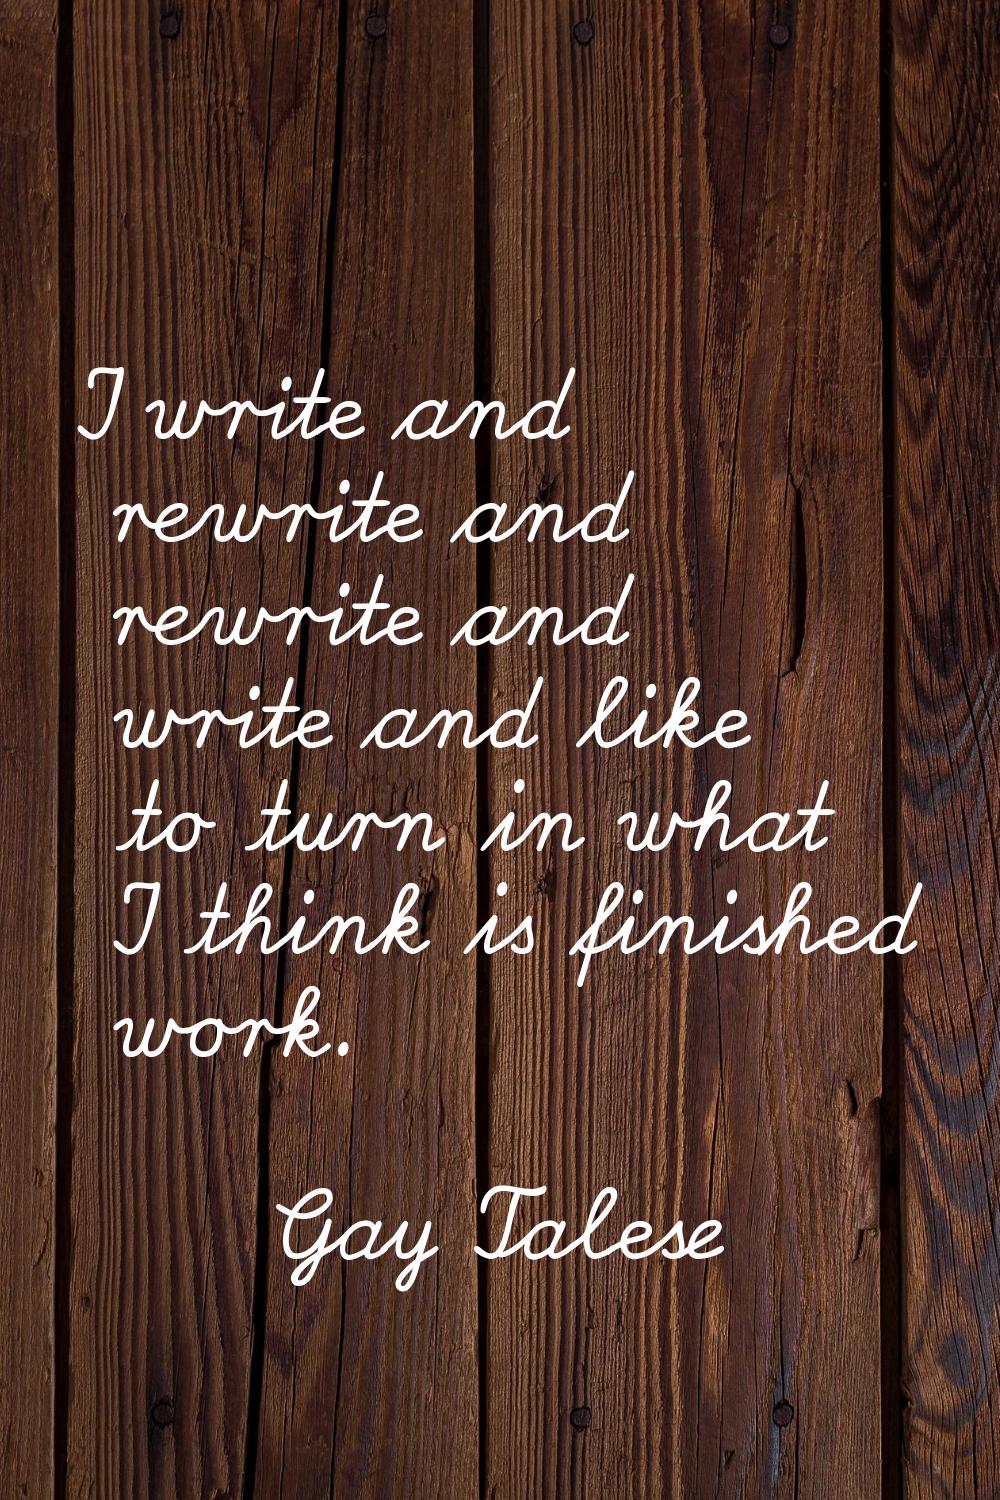 I write and rewrite and rewrite and write and like to turn in what I think is finished work.